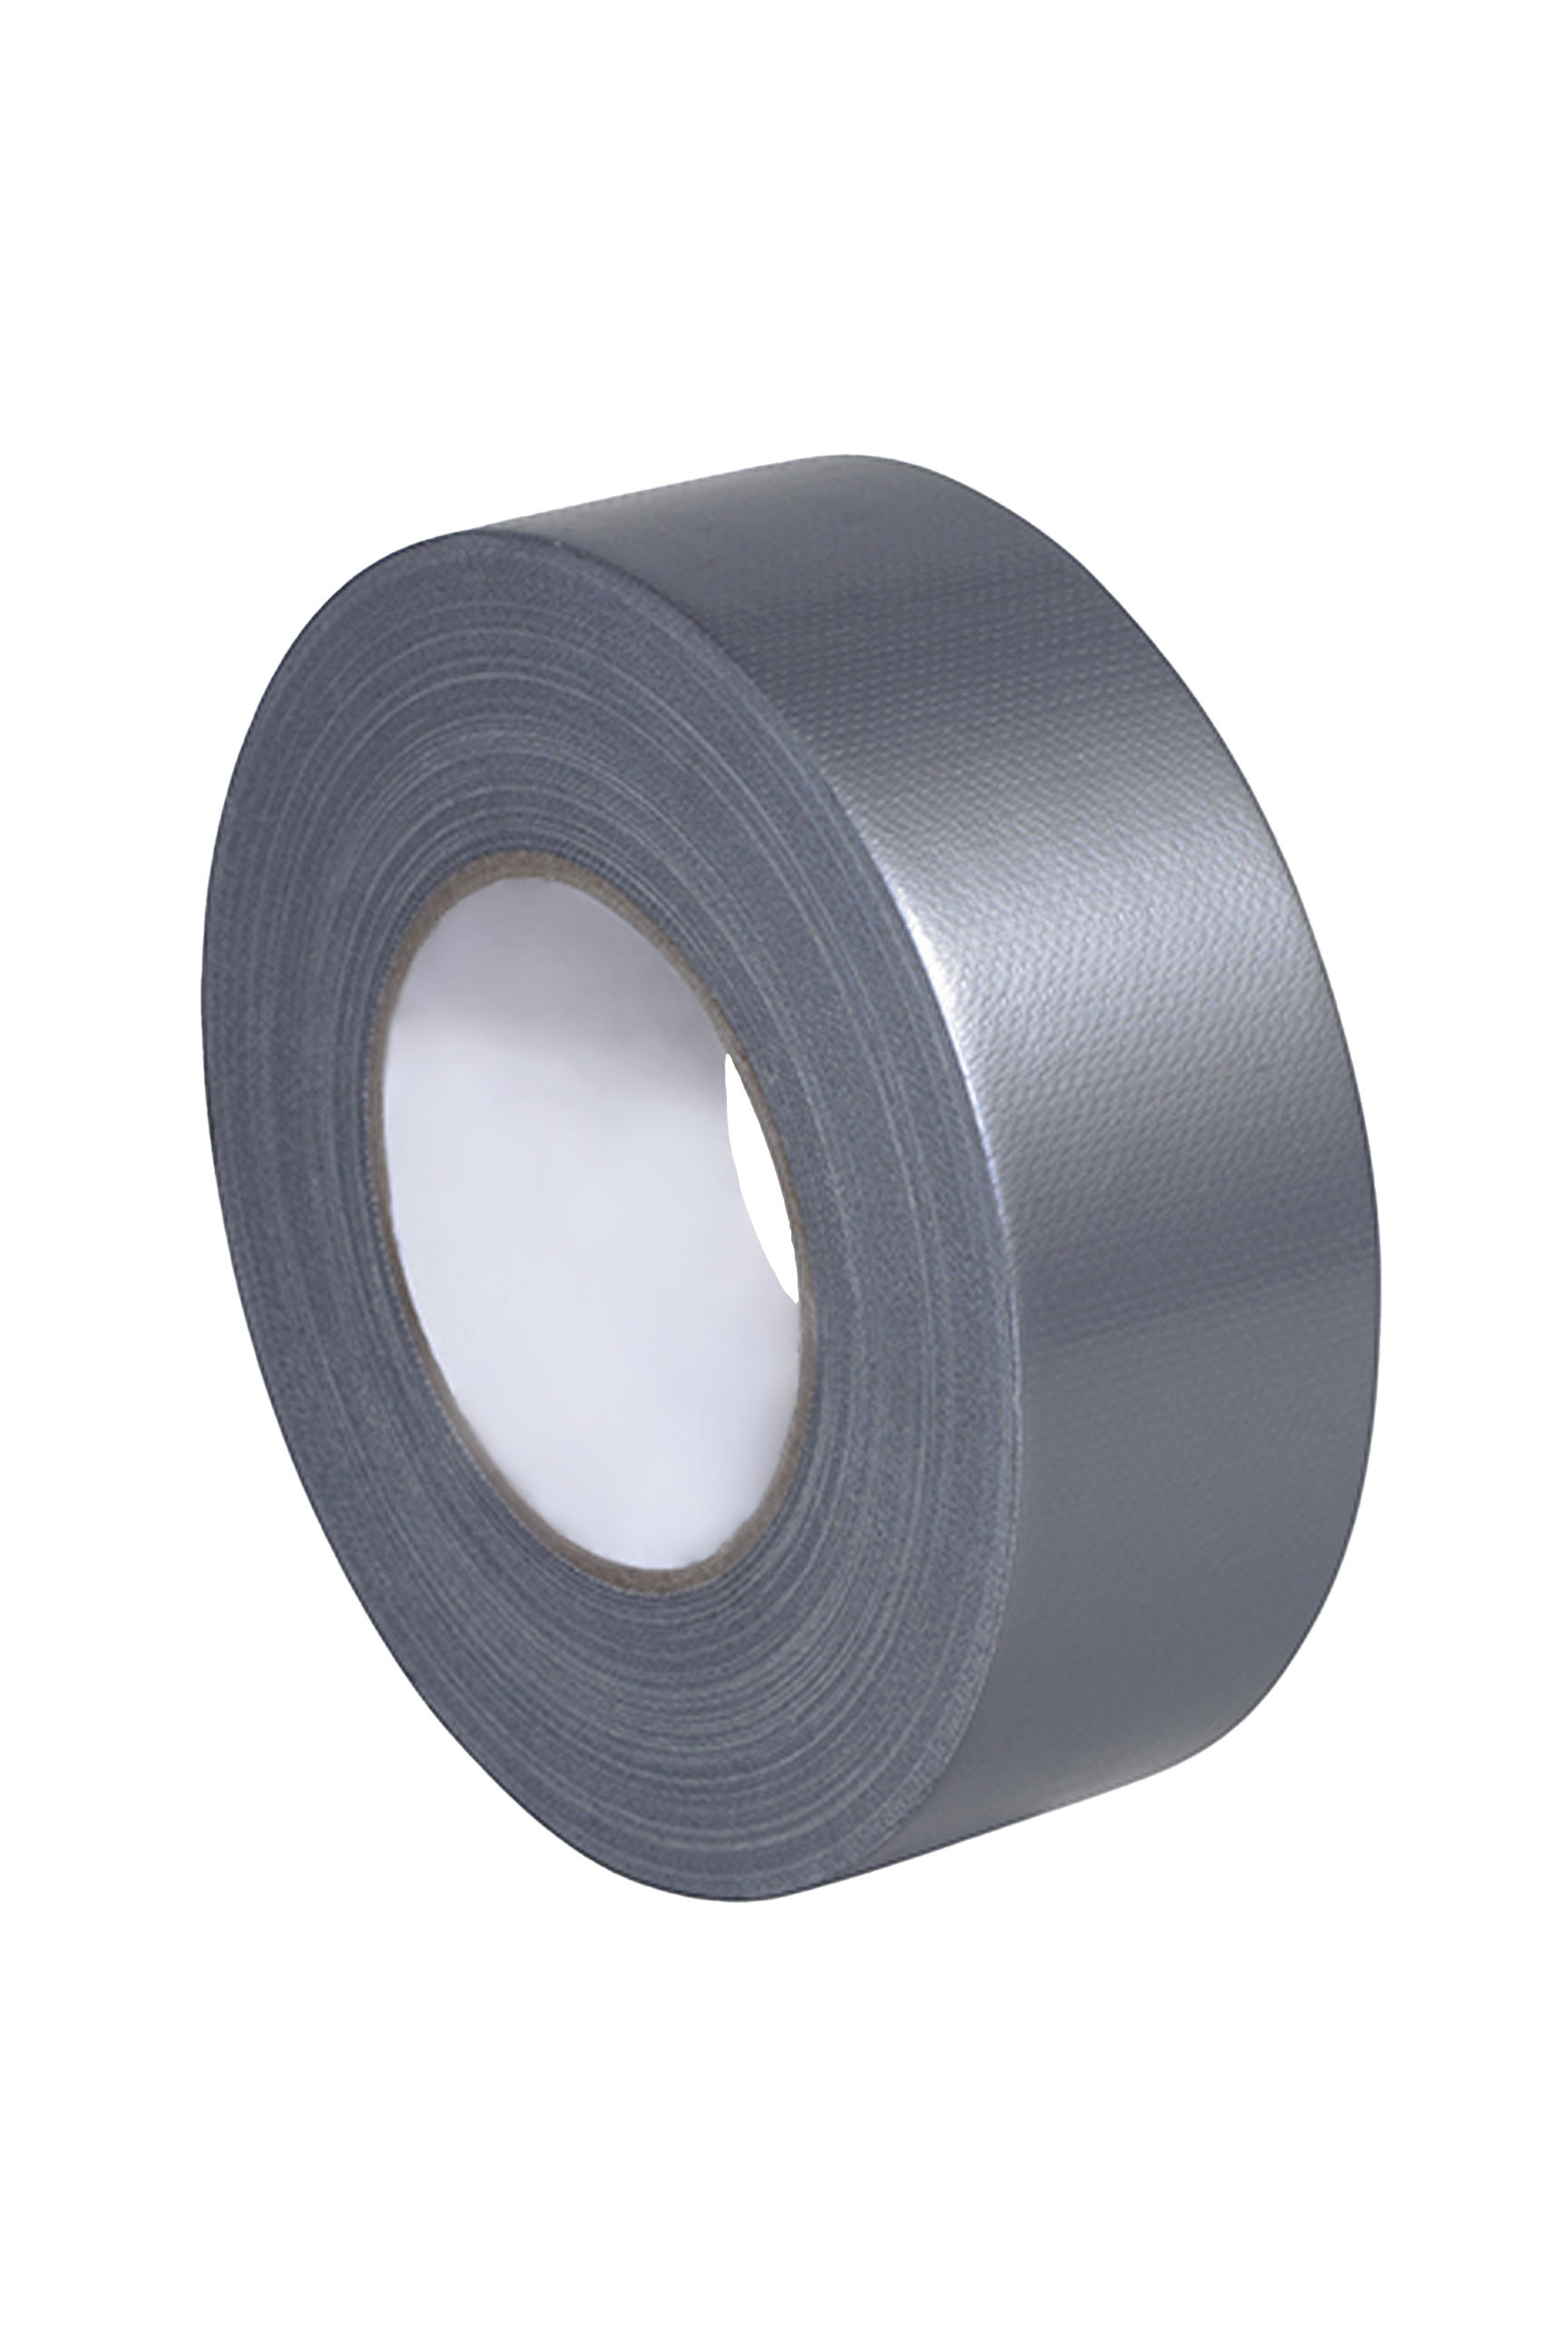 2 x 60 yds. (48mm x 55m) 6 Mil Silver Cloth Duct Tape (24/Case)